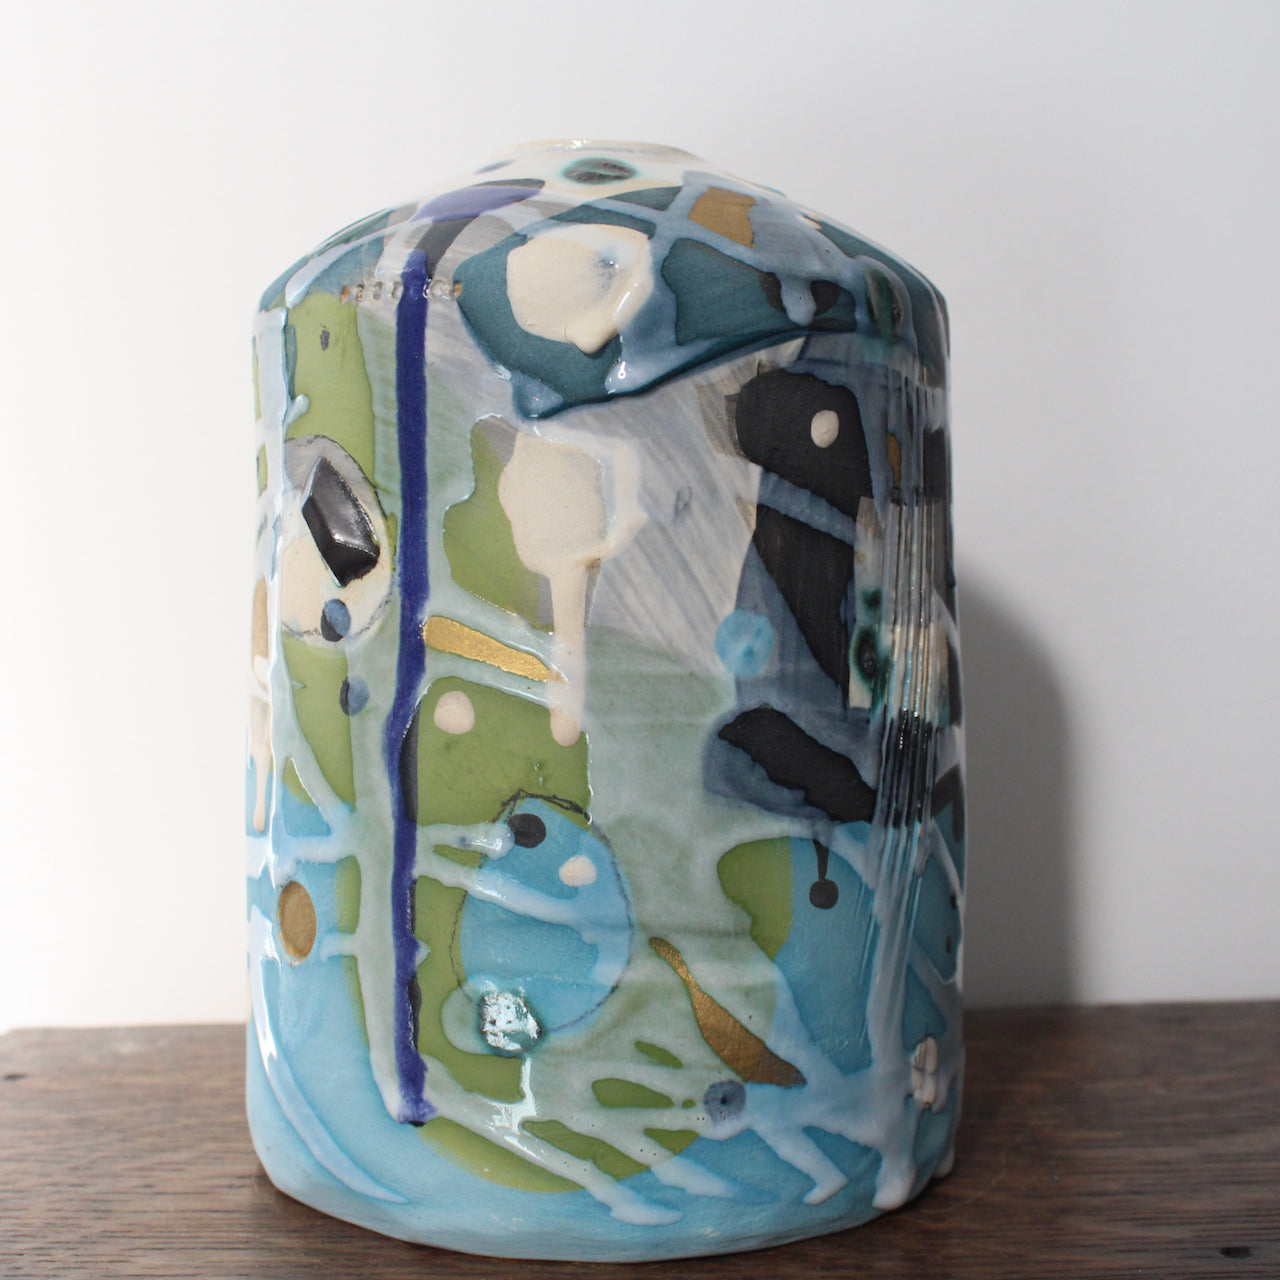 a textured pale blue and turquoise ceramic bottle by Dawn Hajittofi, UK ceramicist 